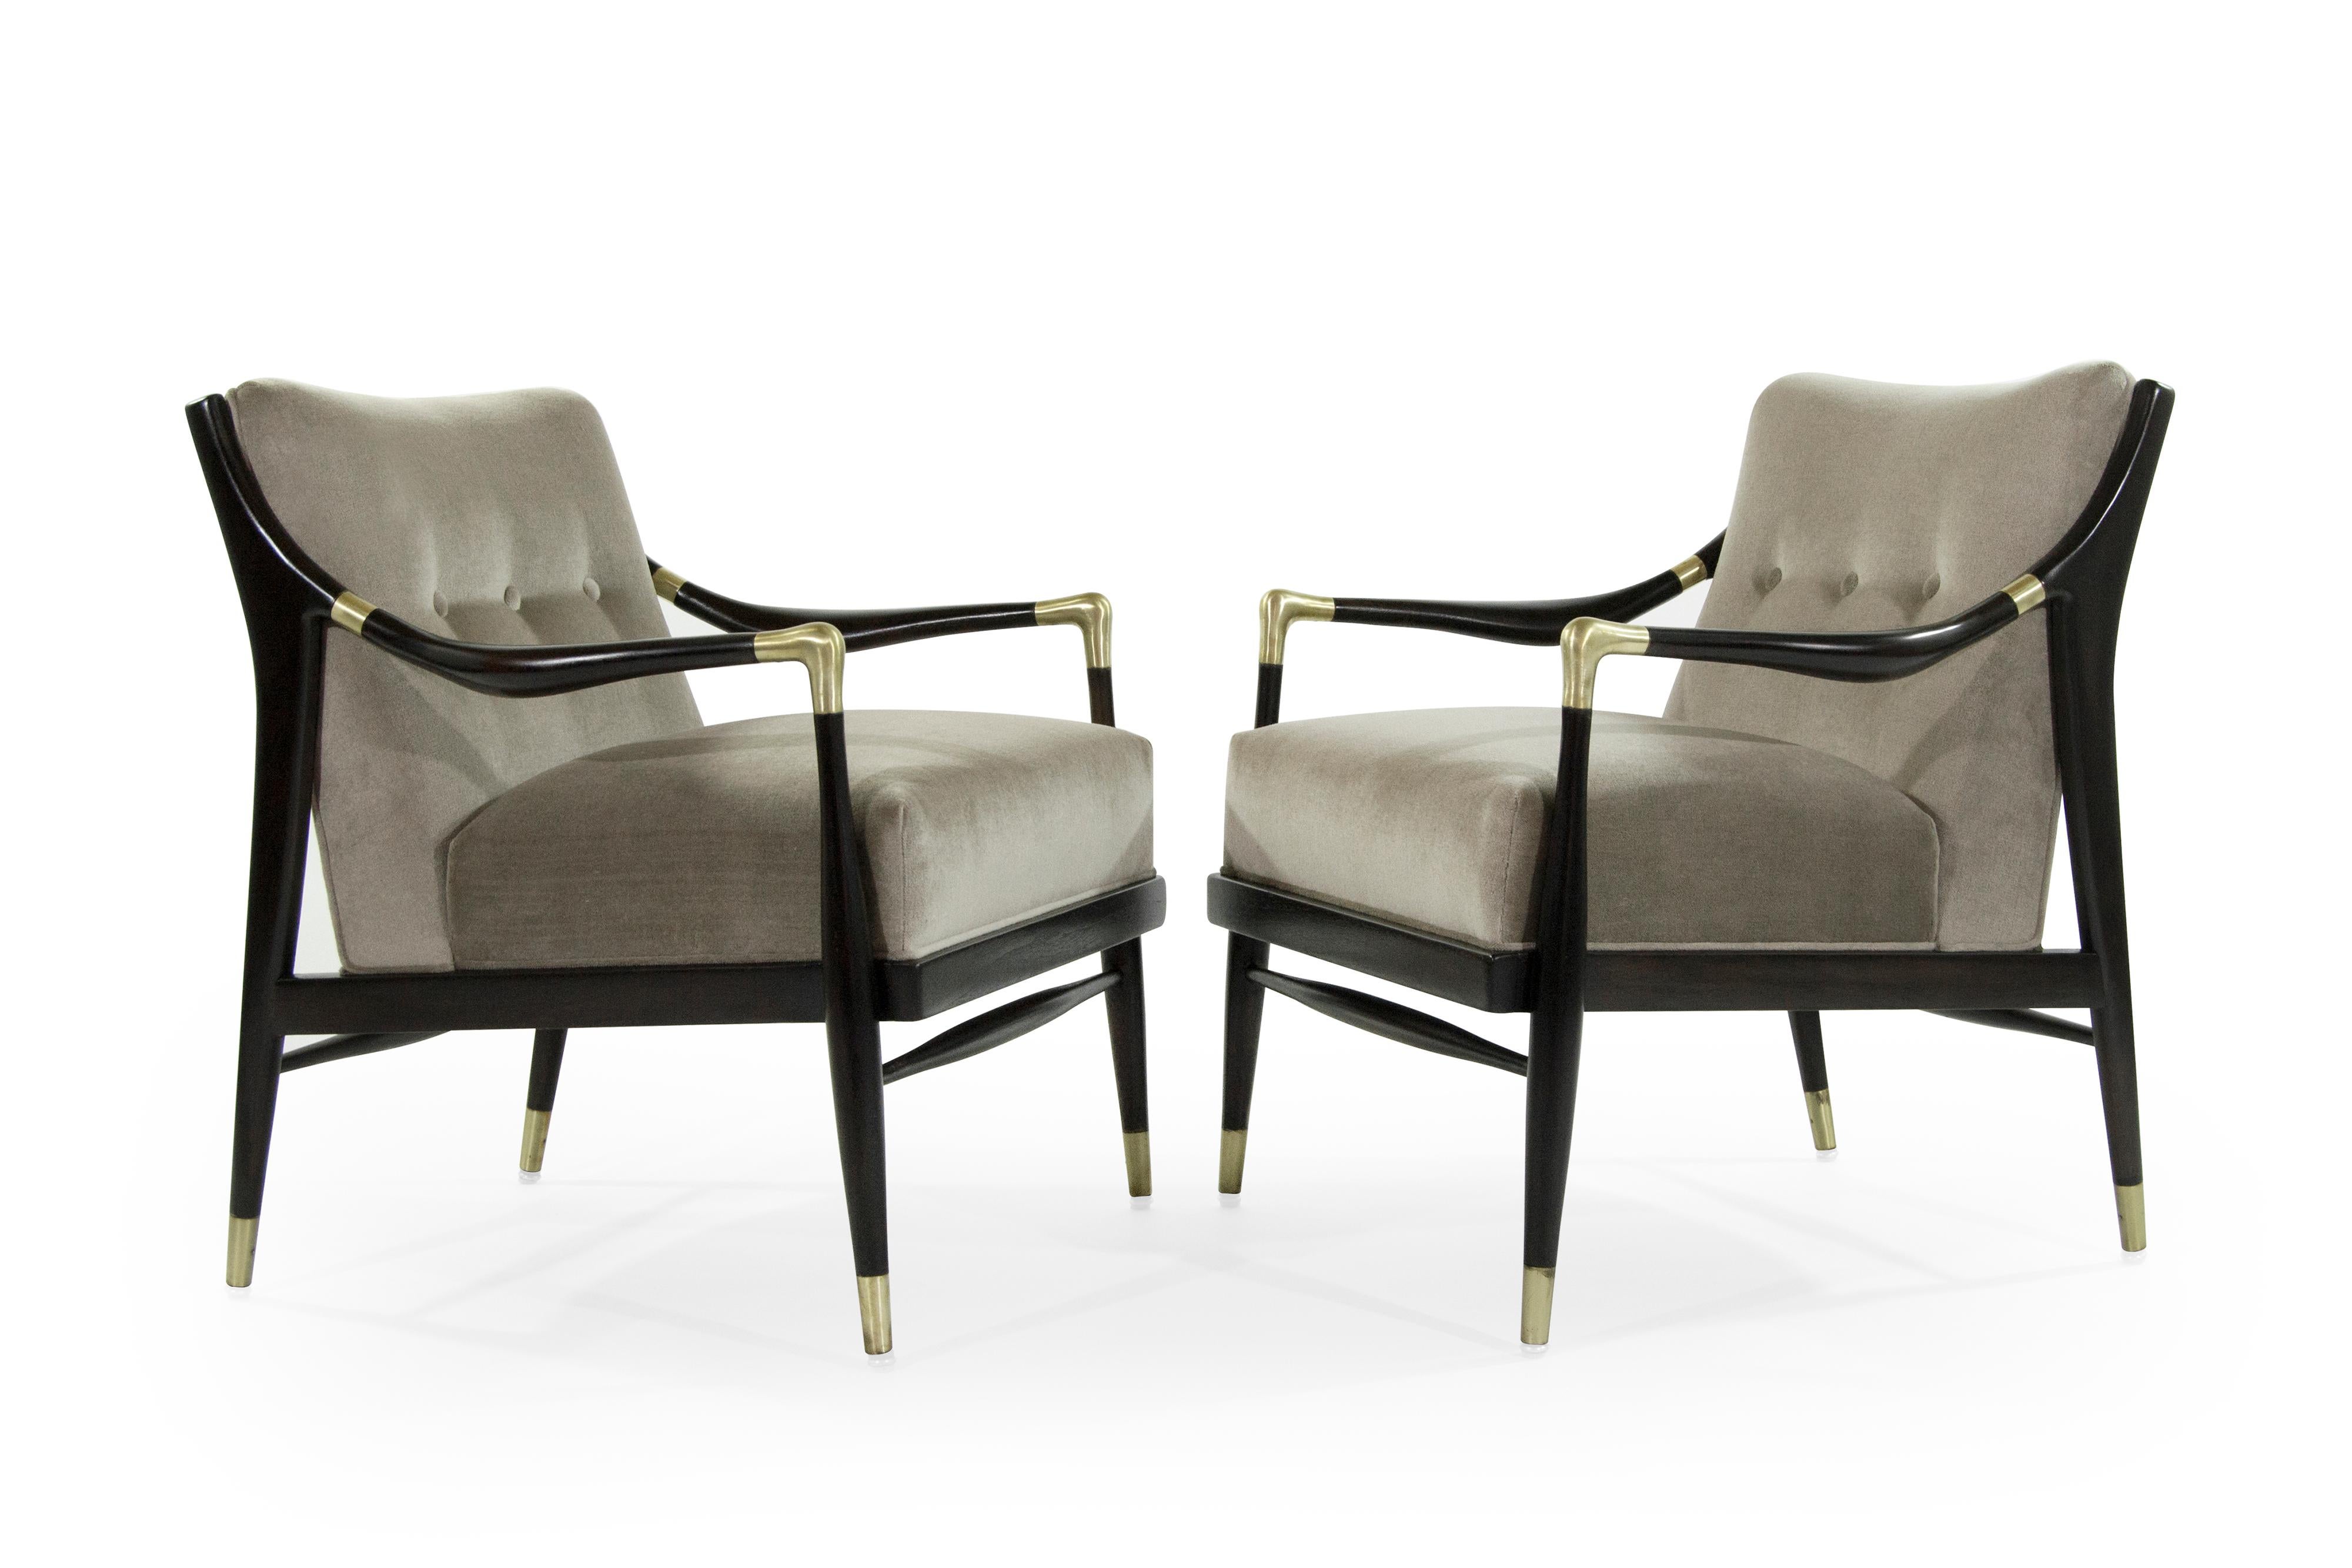 A gorgeous pair of sculptural lounge chairs with brass accents on arms and sabots in the style of Gio Ponti.

Walnut fully restored and stained in espresso. Newly upholstered in taupe mohair.